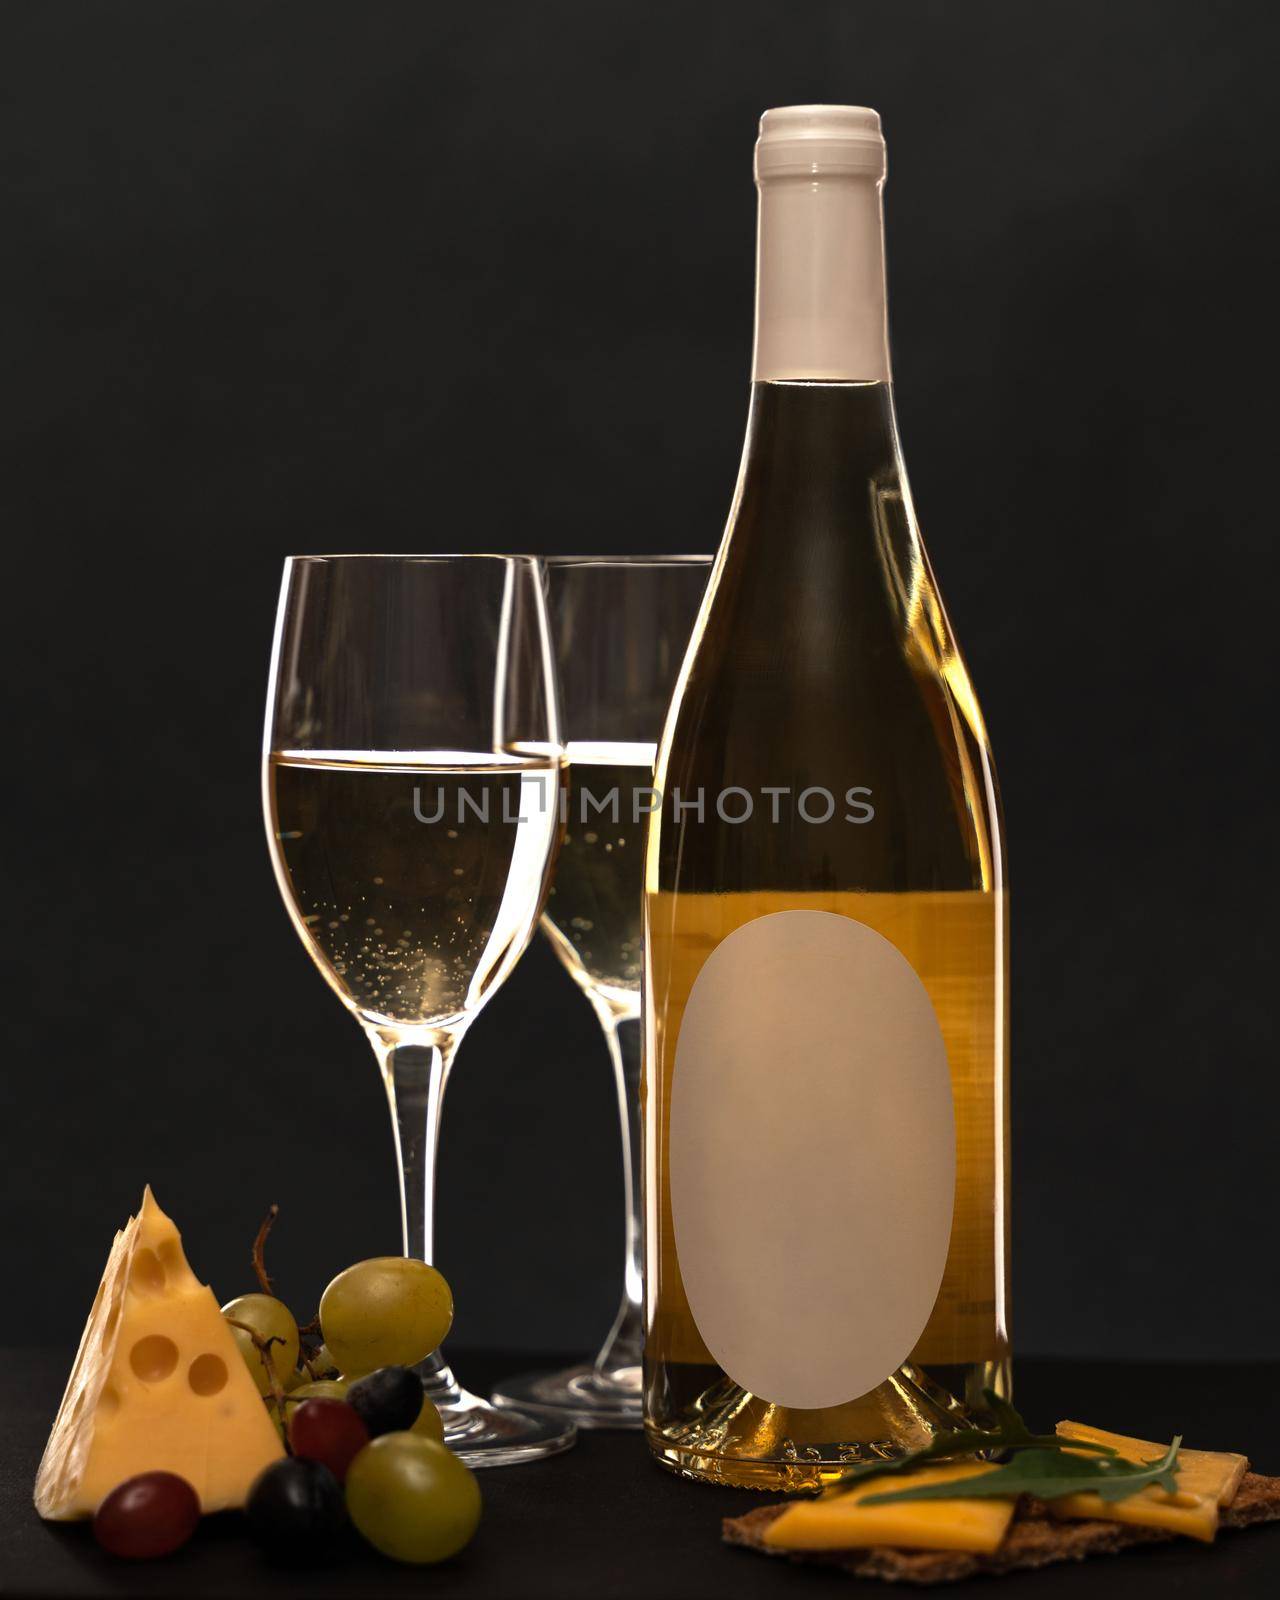 On a black background, a bottle of white wine, two glasses of white wine, next to grapes, a piece of triangular cheese, a sandwich with cheese and herbs by Matiunina